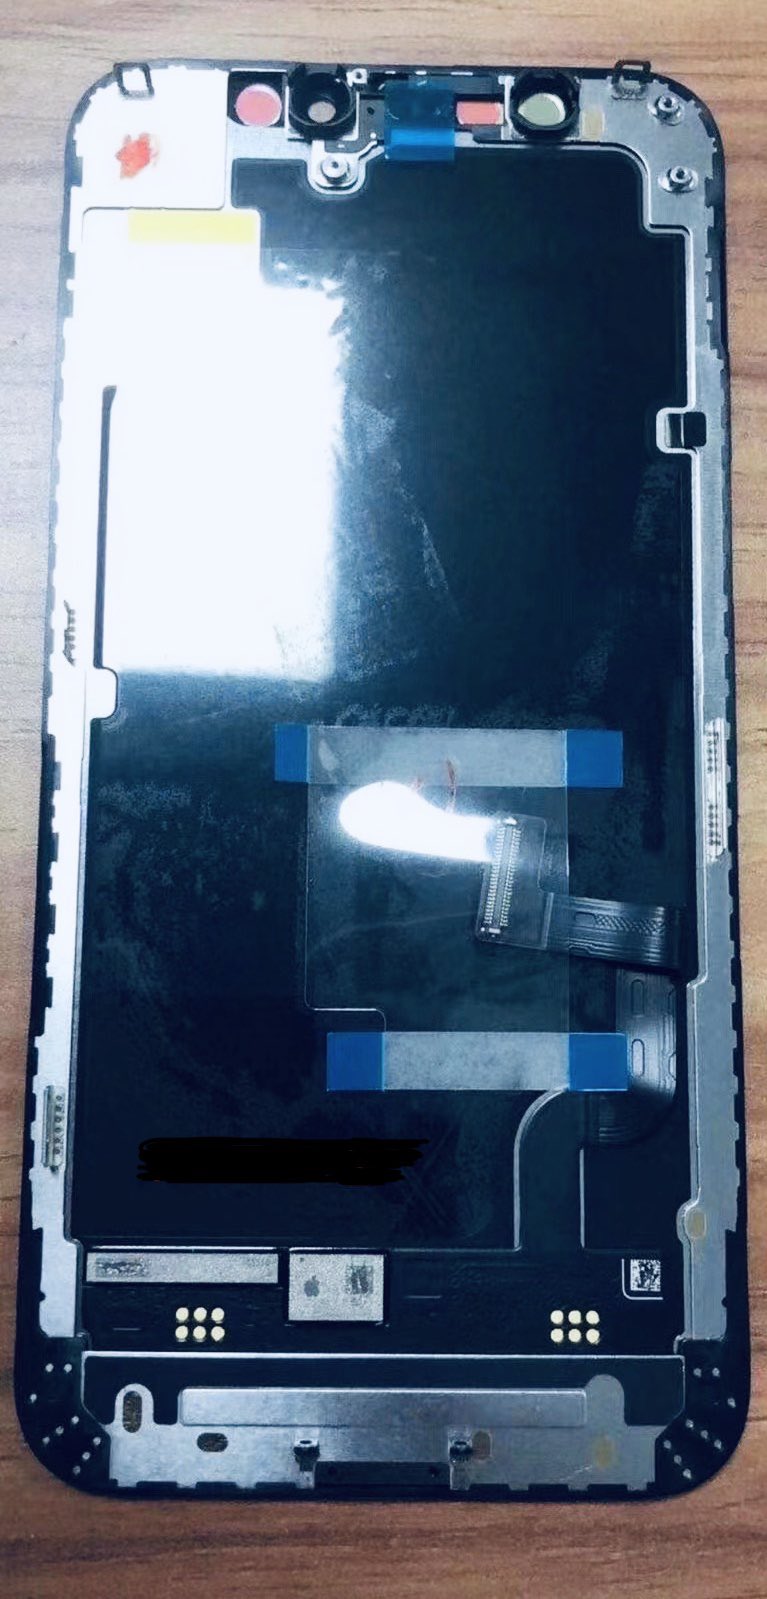 photo of Supposed iPhone 12 Display Unit Leaks image